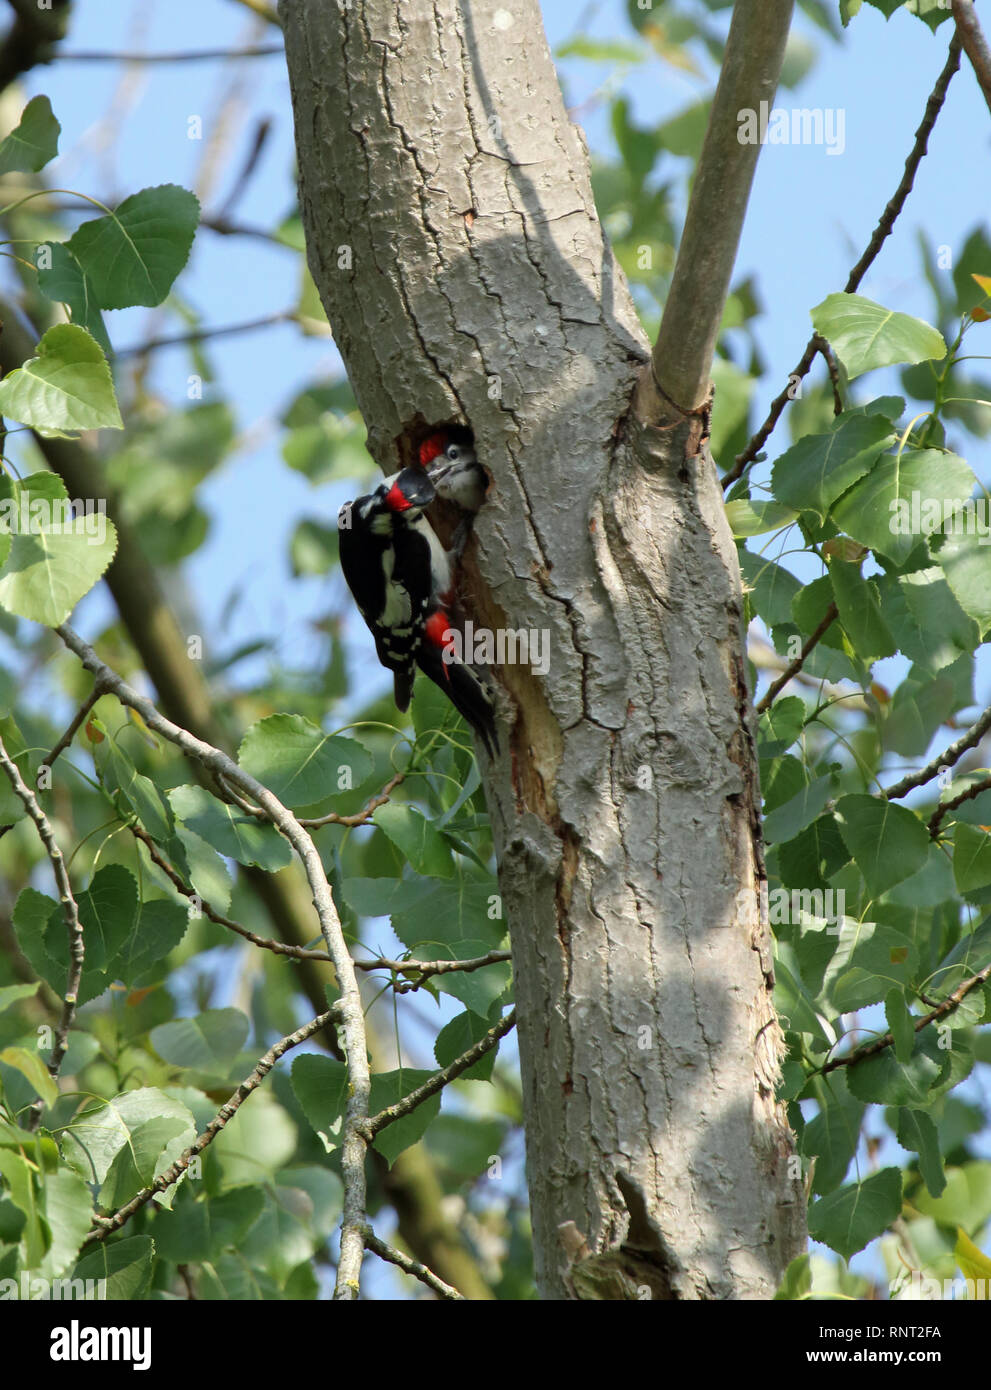 Great spotted woodpecker chick (Dendrocopus major) being fed at its nest hole, Felmersham SSSI, Bedfordshire, UK. Stock Photo